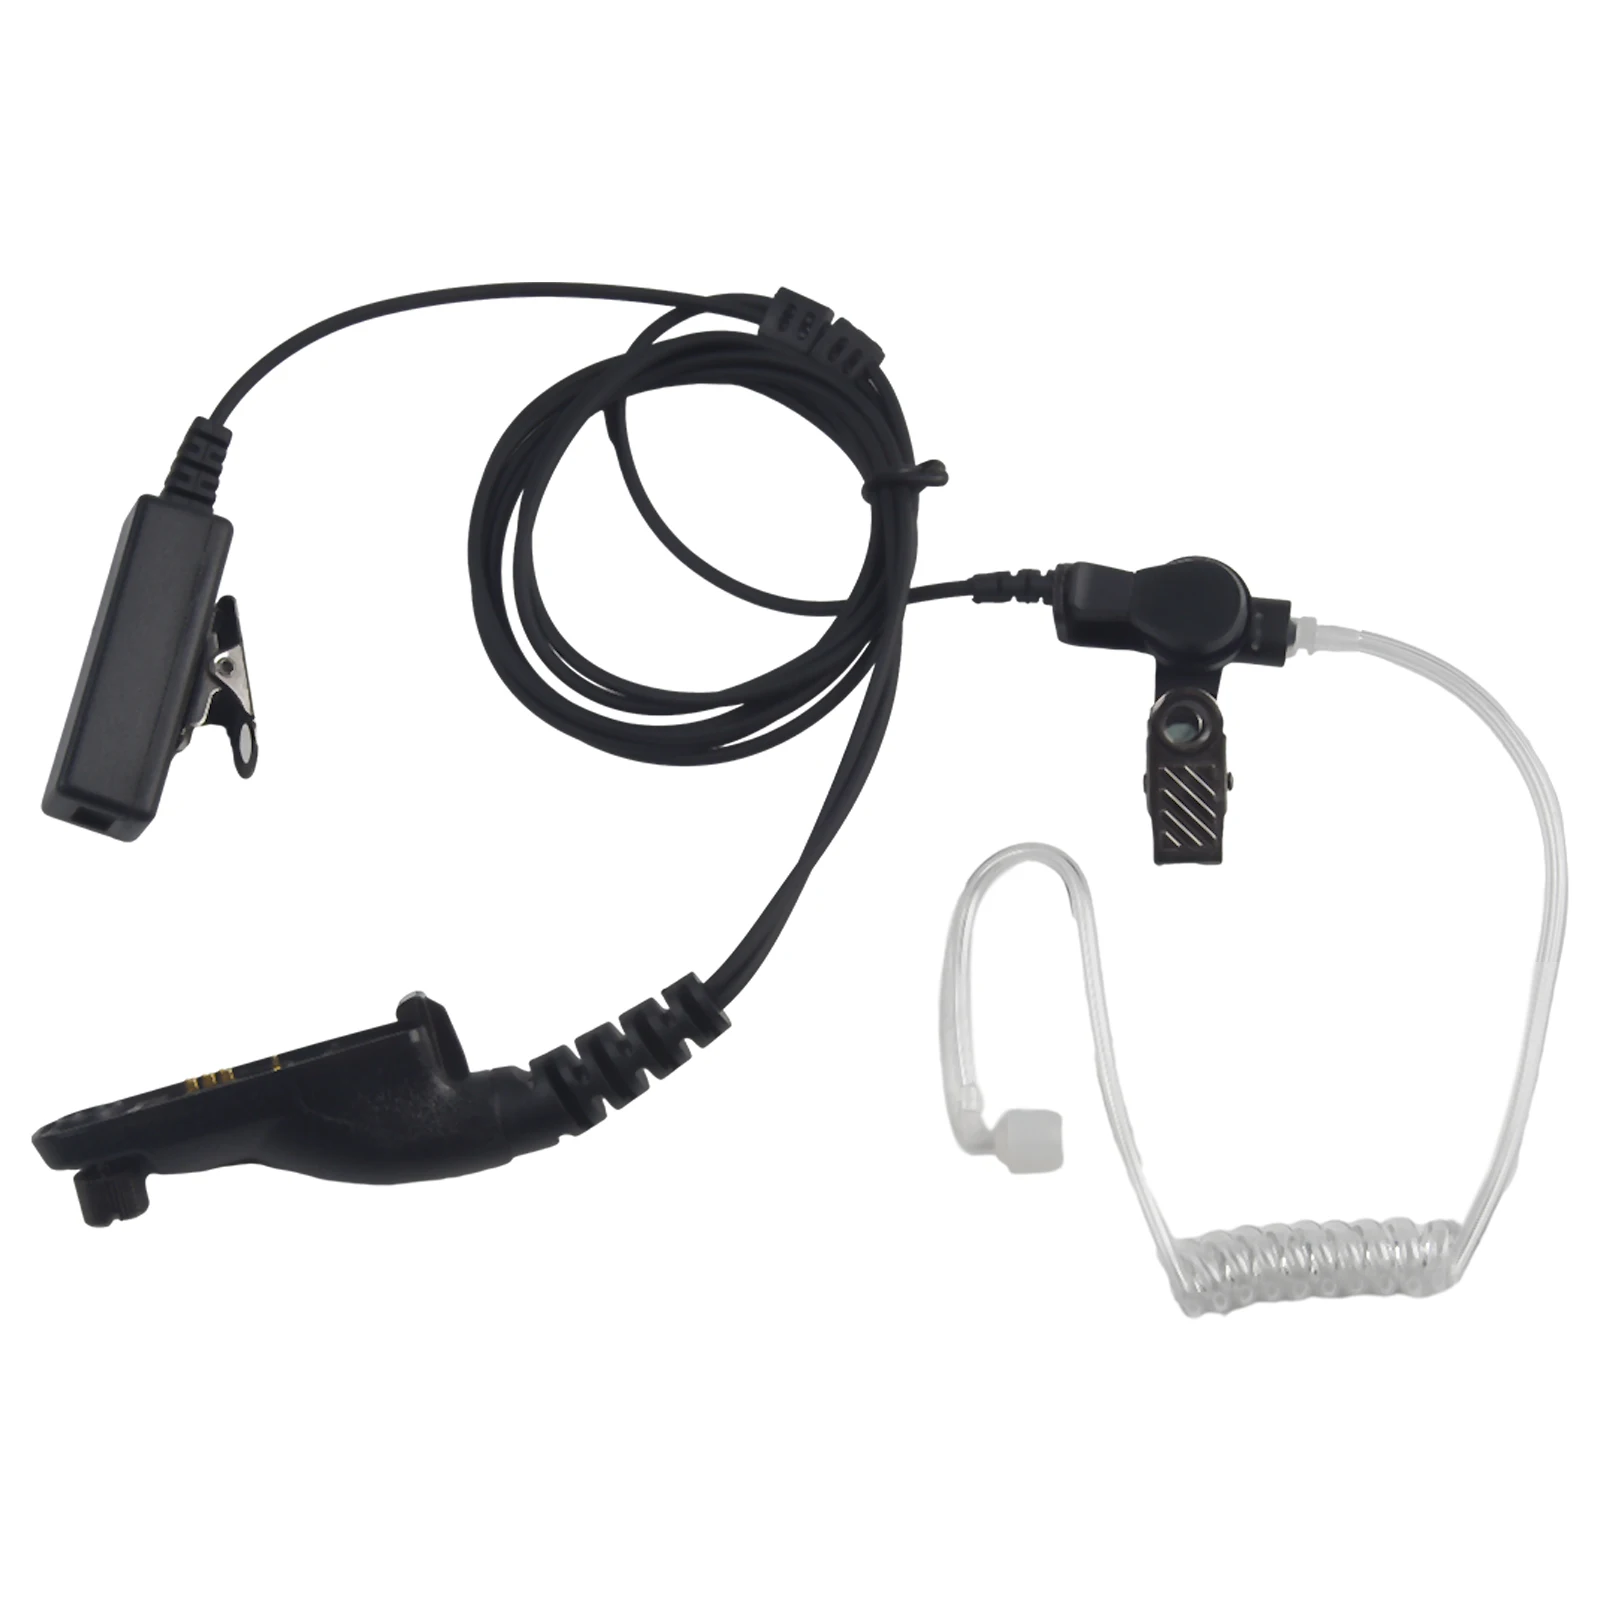 

Headset Lightweight and Durable PTT Headset Earpiece Mic for Motorola APX8000/7000/6000 & XPR6550/6500/6300 Radio